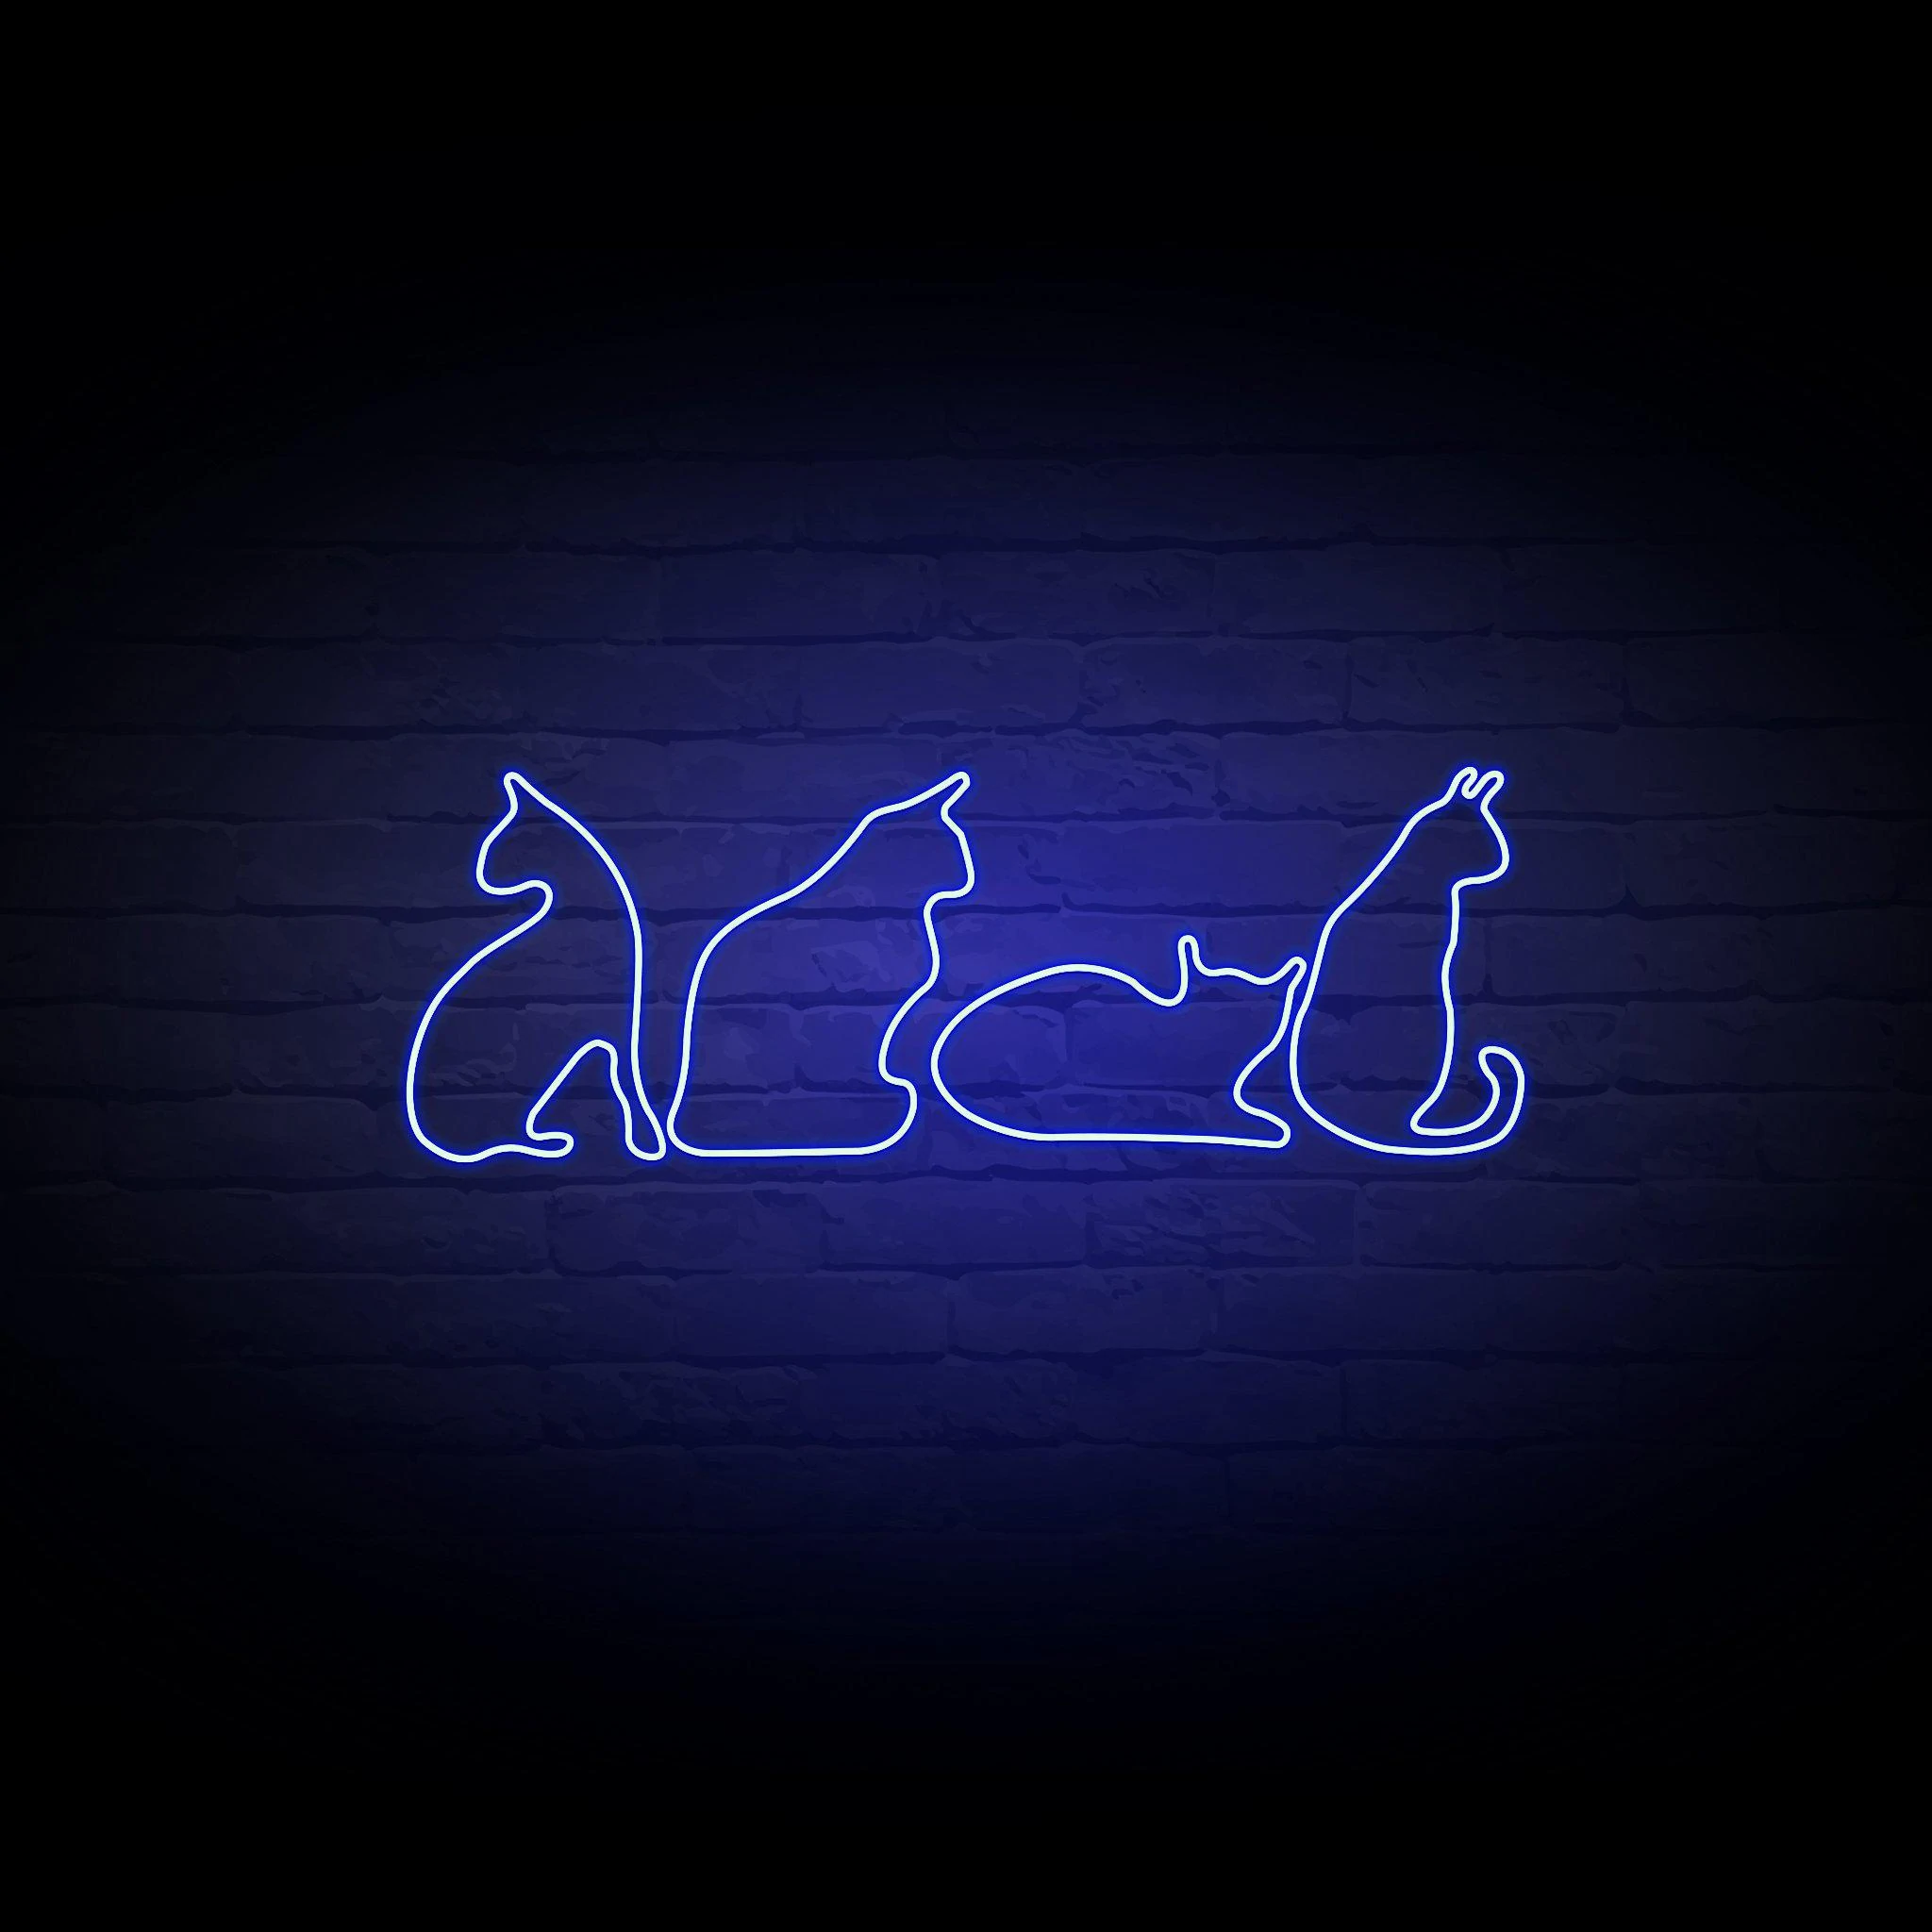 'CATS' NEON SIGN - NeonFerry